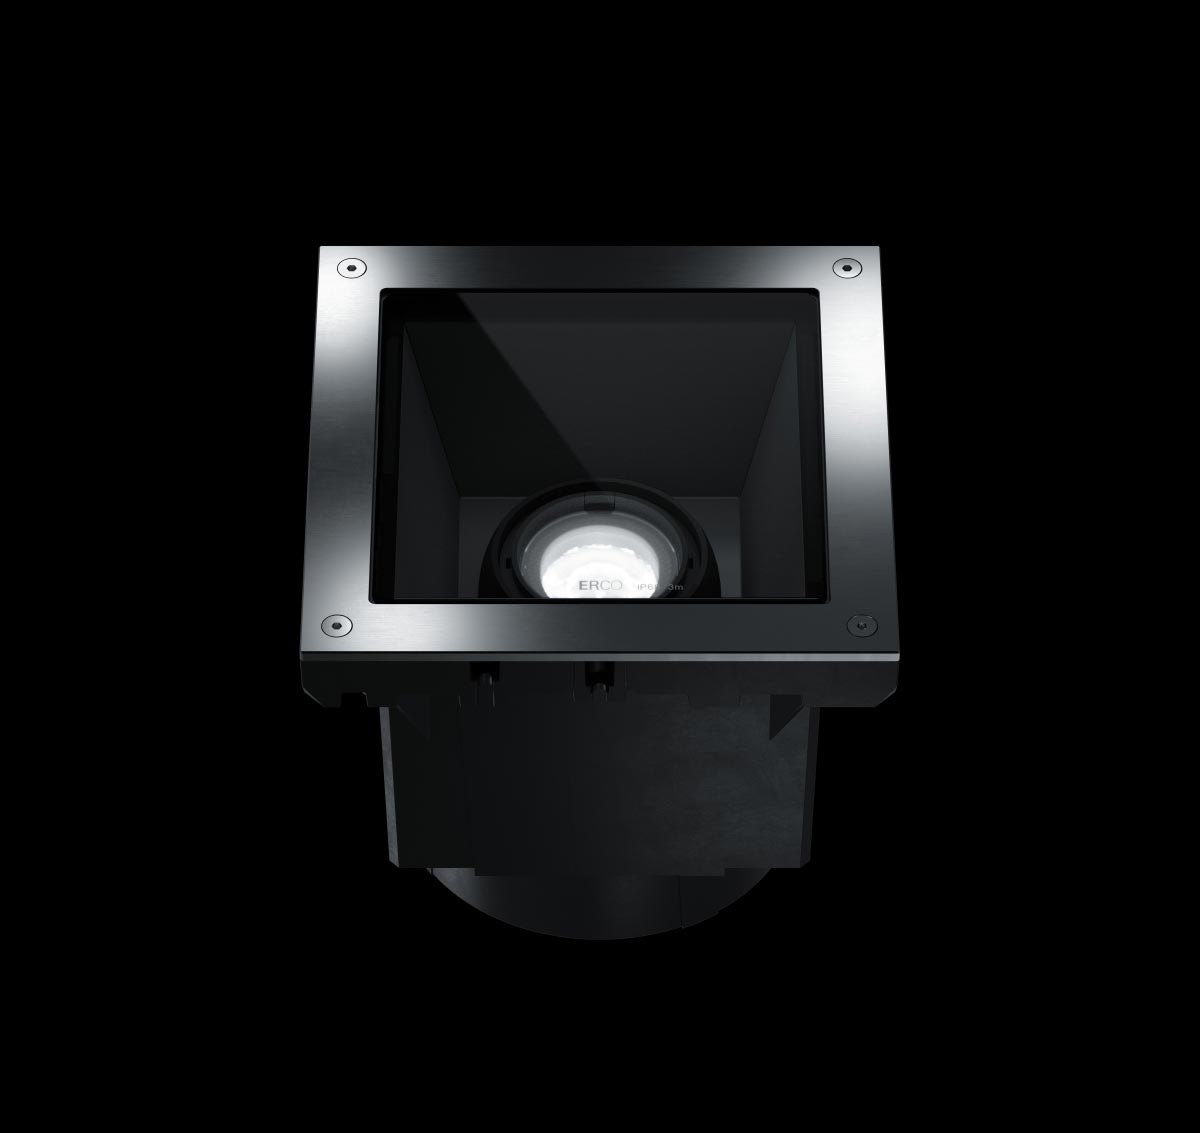 Tesis IP68 Square In-ground Directional Luminaire Flood Beam 6W LED 4000K ECG Stainless Steel Covered Trim